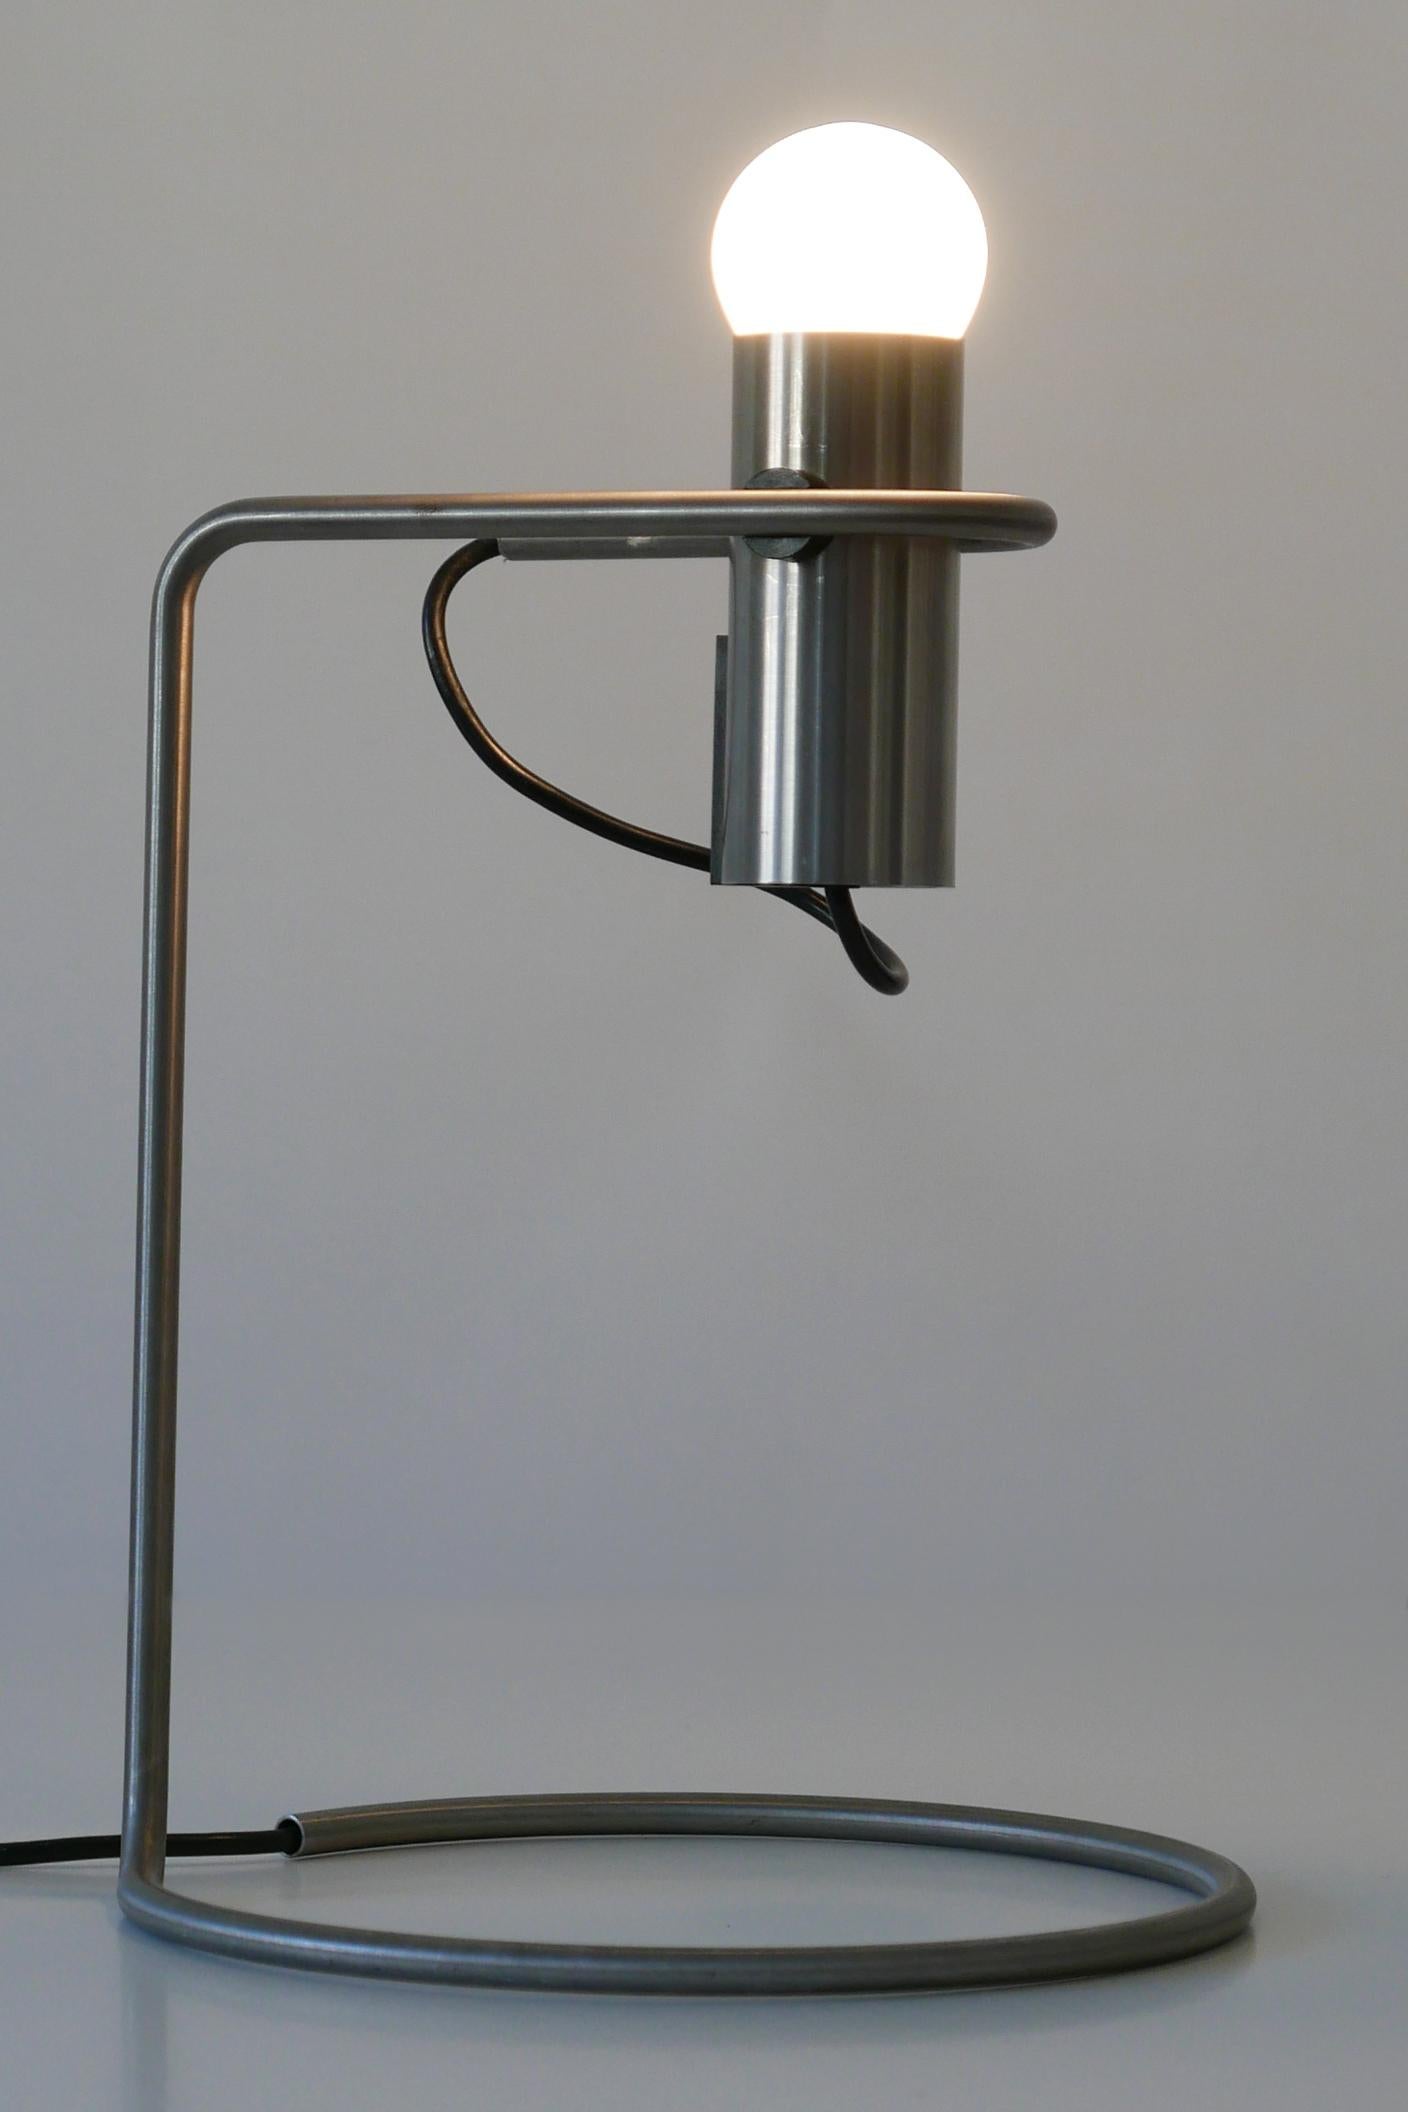 Exceptional Minimalistic Mid-Century Modern Table Lamp or Desk Light, 1960s For Sale 7